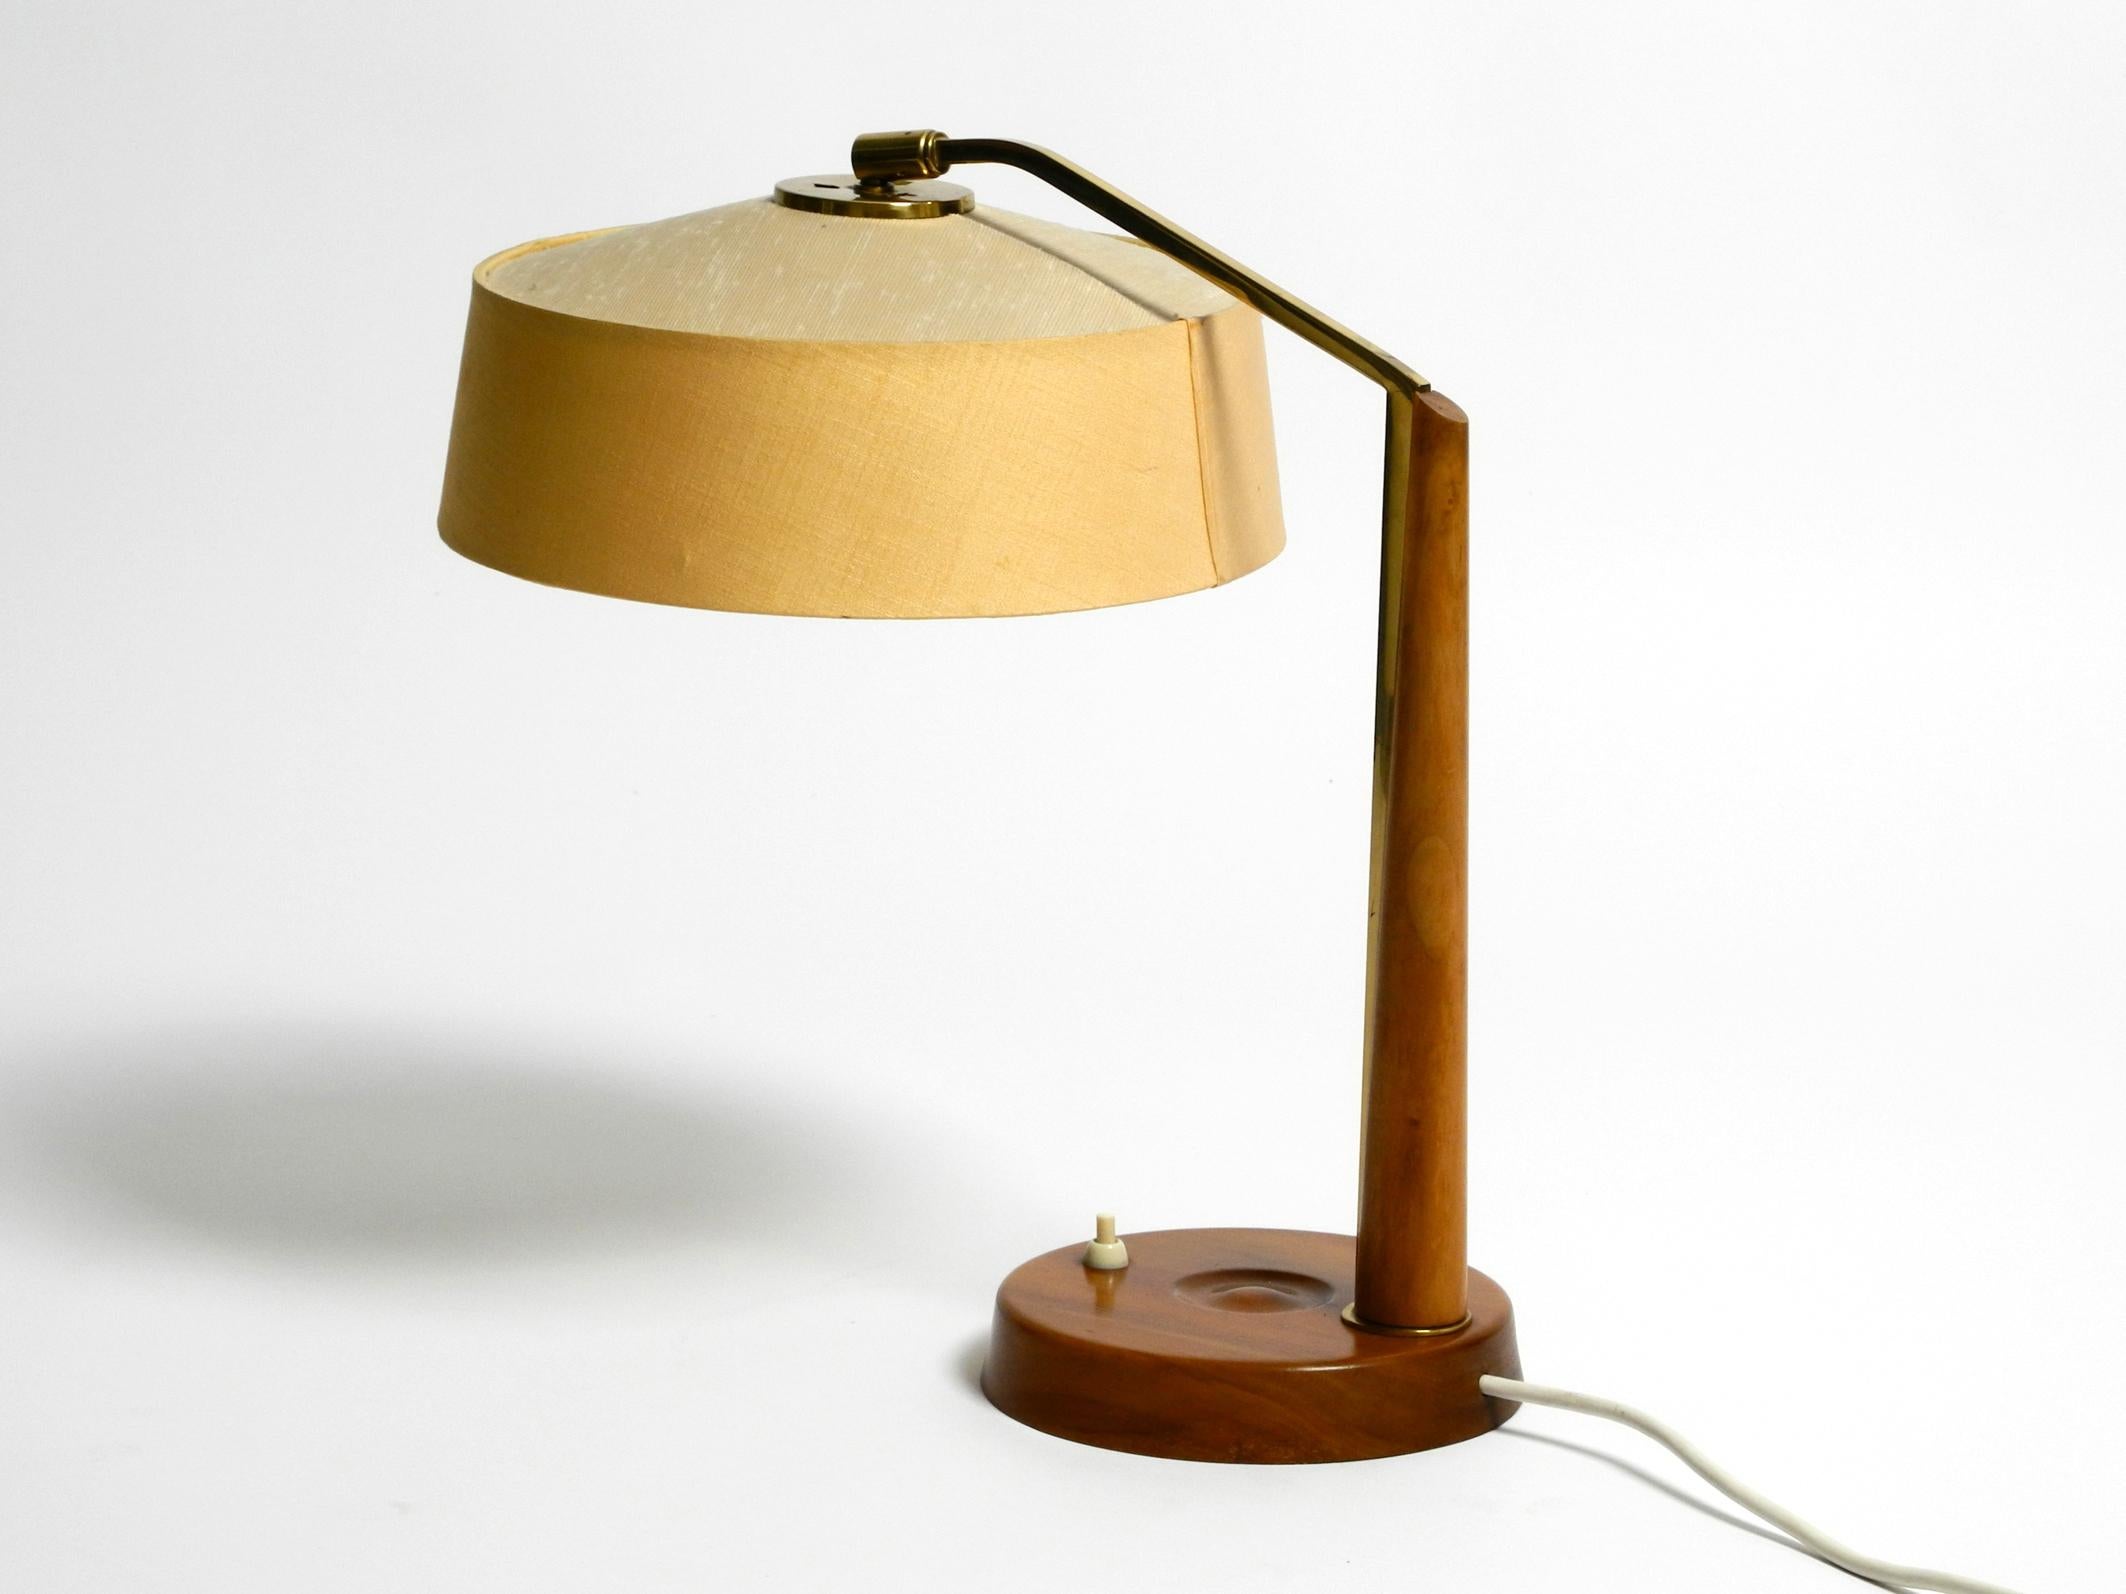 Beautiful, rare, large, Mid Century table lamp by the Temde type 32.
Great 1950s design. Made in Switzerland. With original label on the underside of the foot. Round fabric shade with metal frame and walnut base.
The frame is made of walnut wood and